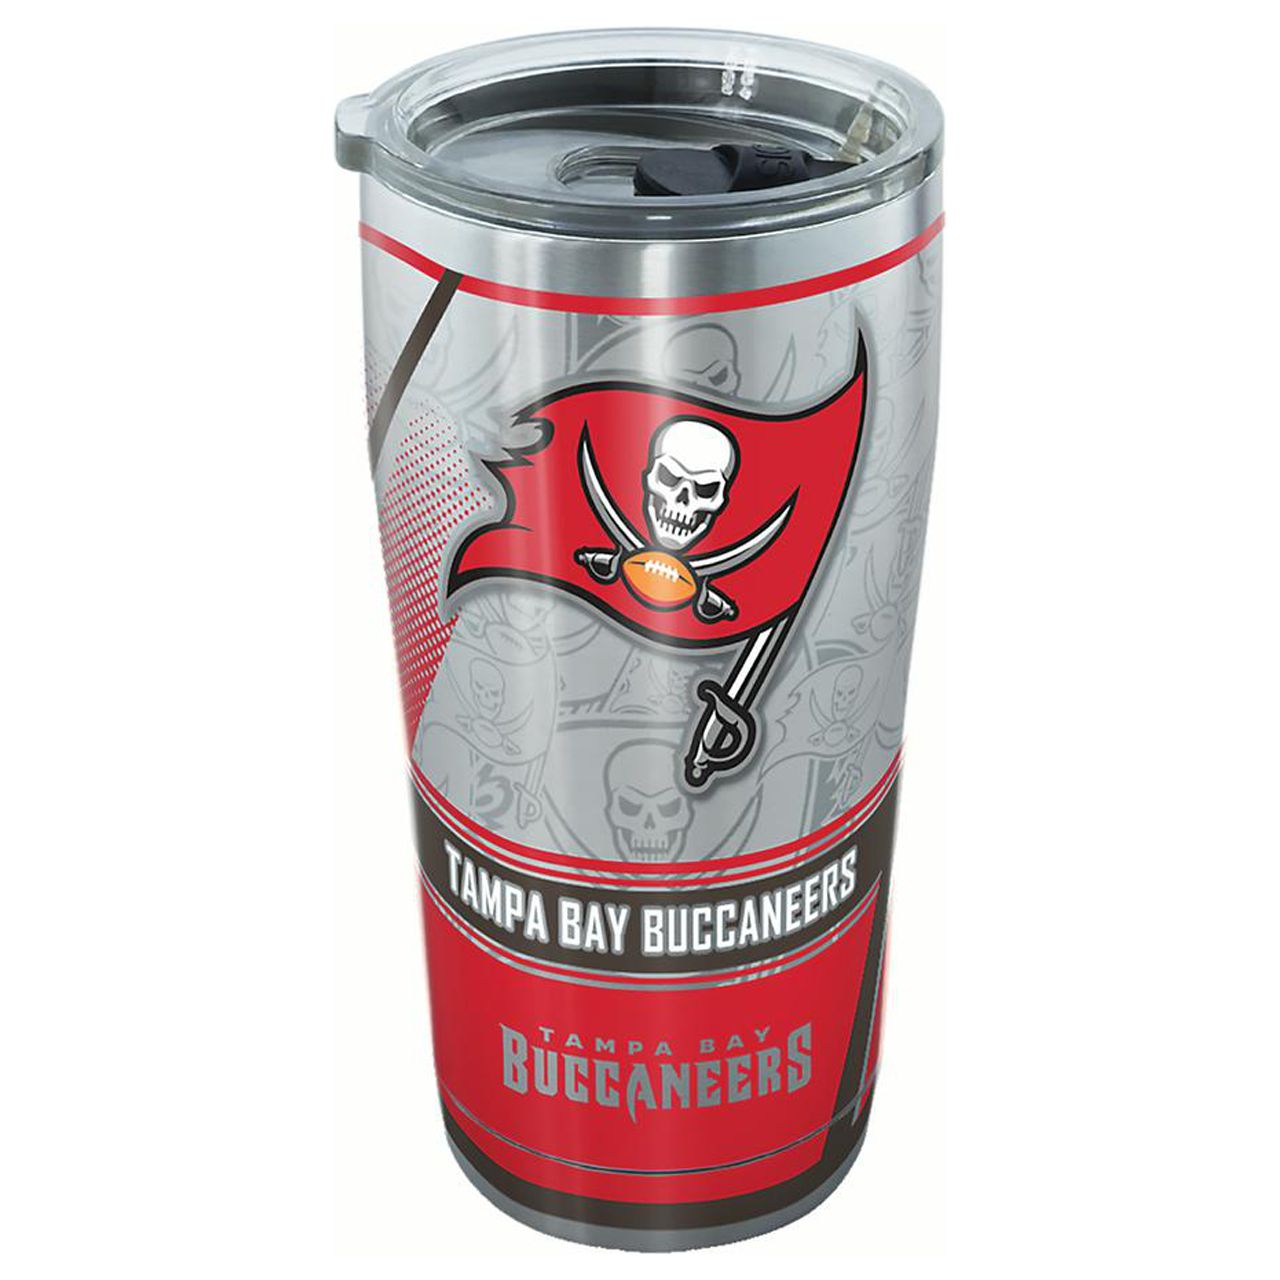 NFL Tampa Bay Buccaneers Edge 20 oz Stainless Steel Tumbler with lid - image 1 of 3